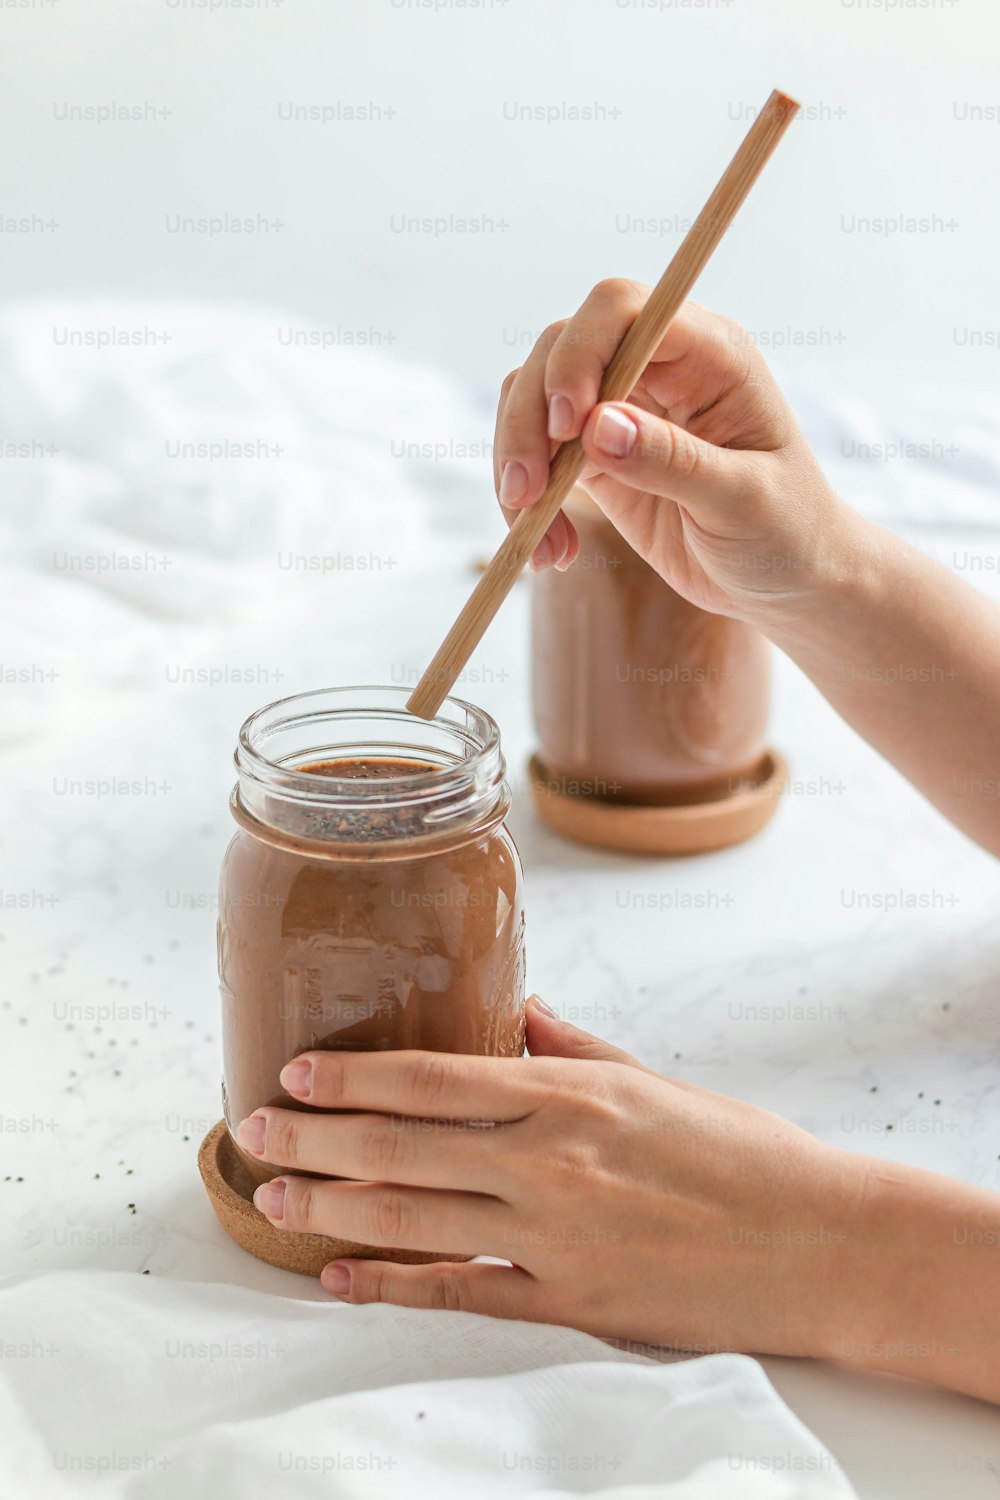 a person holding a wooden spoon over a jar of chocolate